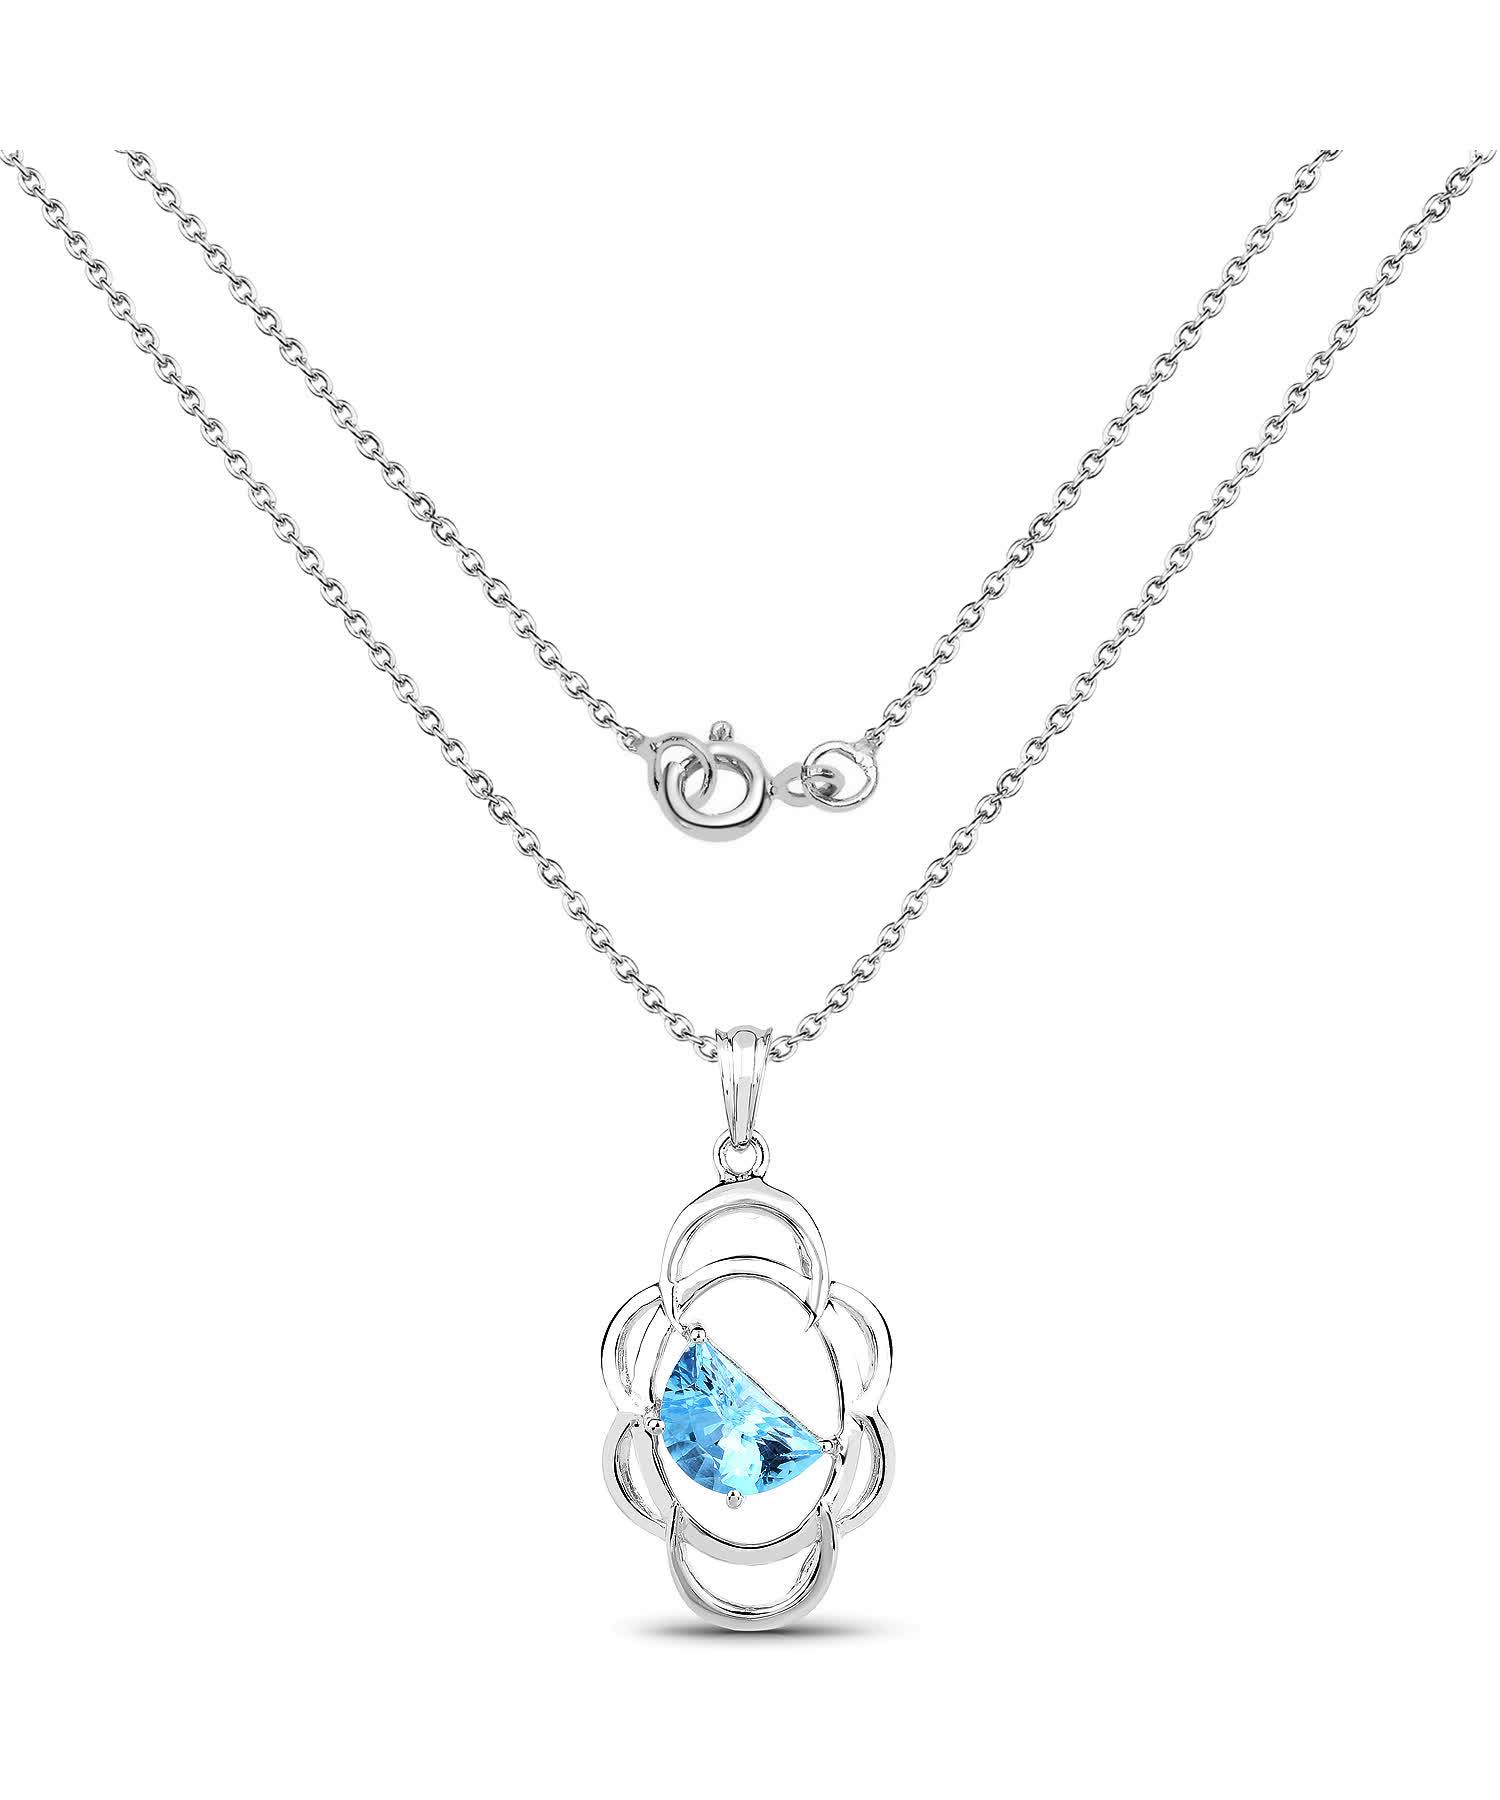 4.60ctw Natural Swiss Blue Topaz Rhodium Plated 925 Sterling Silver Pendant With Chain View 2